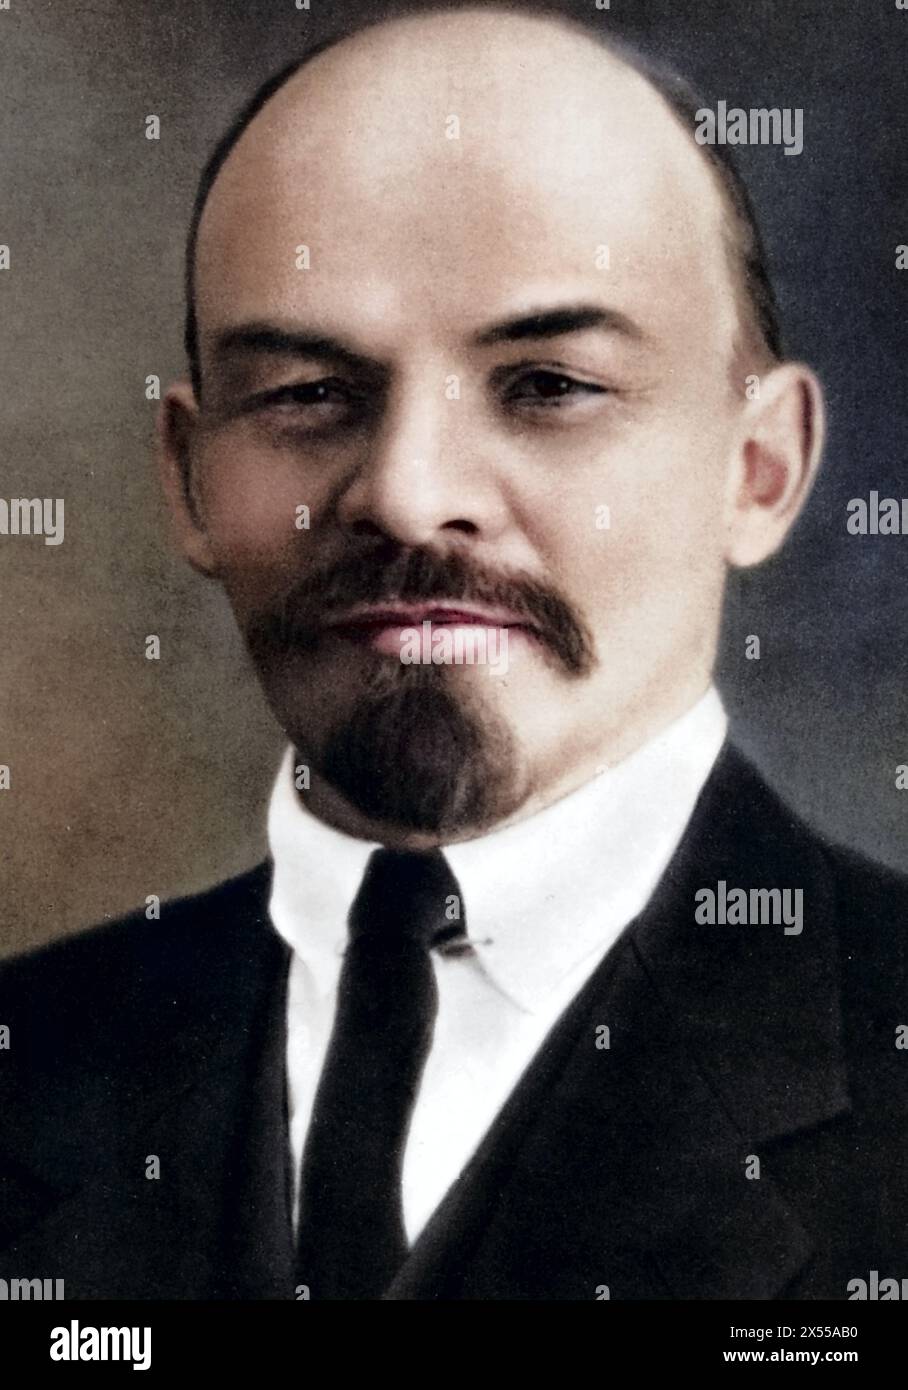 Lénine (Vladimir Ilyich Oulianov), 22.4.1870 - 21.1,1924, homme politique russe, portrait, Zurich, 1916, ADDITIONAL-RIGHTS-LEARANCE-INFO-NOT-AVAILABLE Banque D'Images